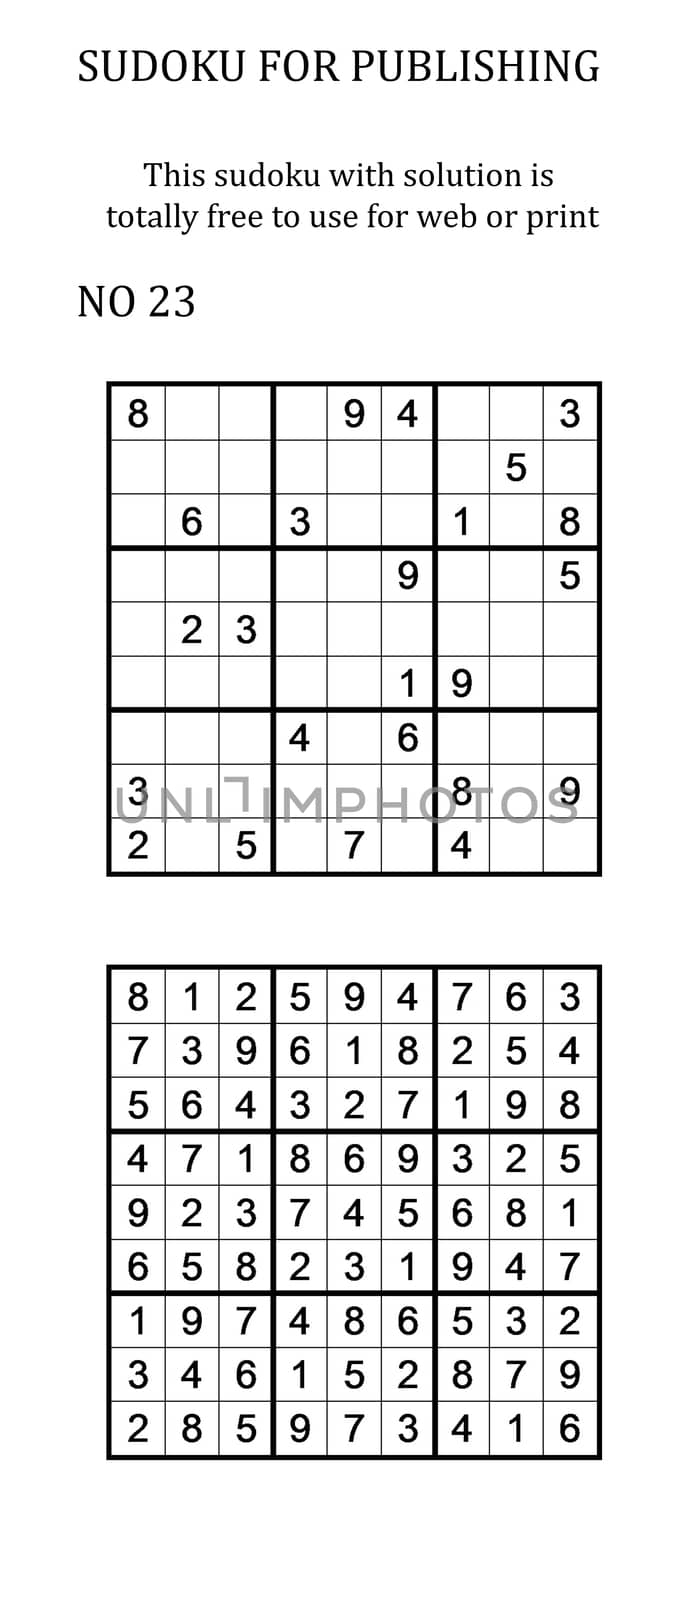 Sudoku for free use with solution